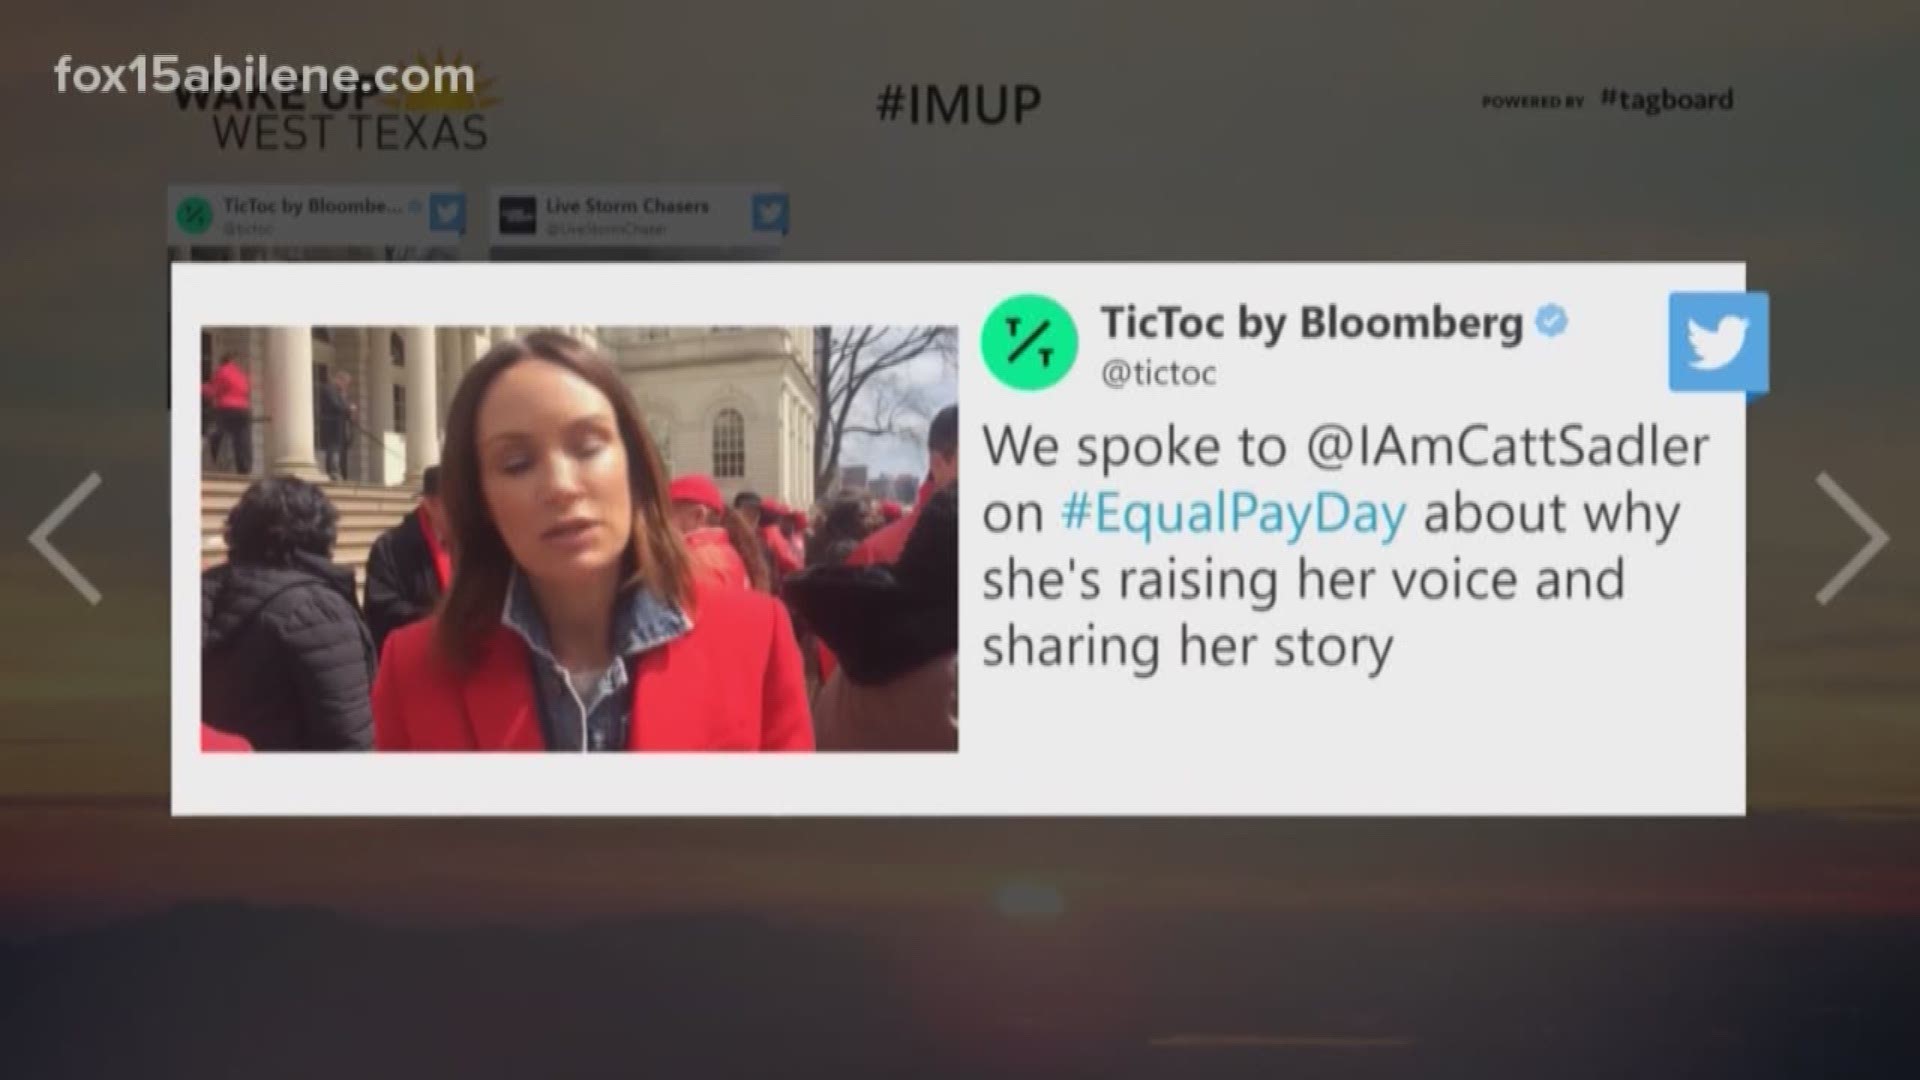 Former E! News host stands up and speaks out for equal pay.